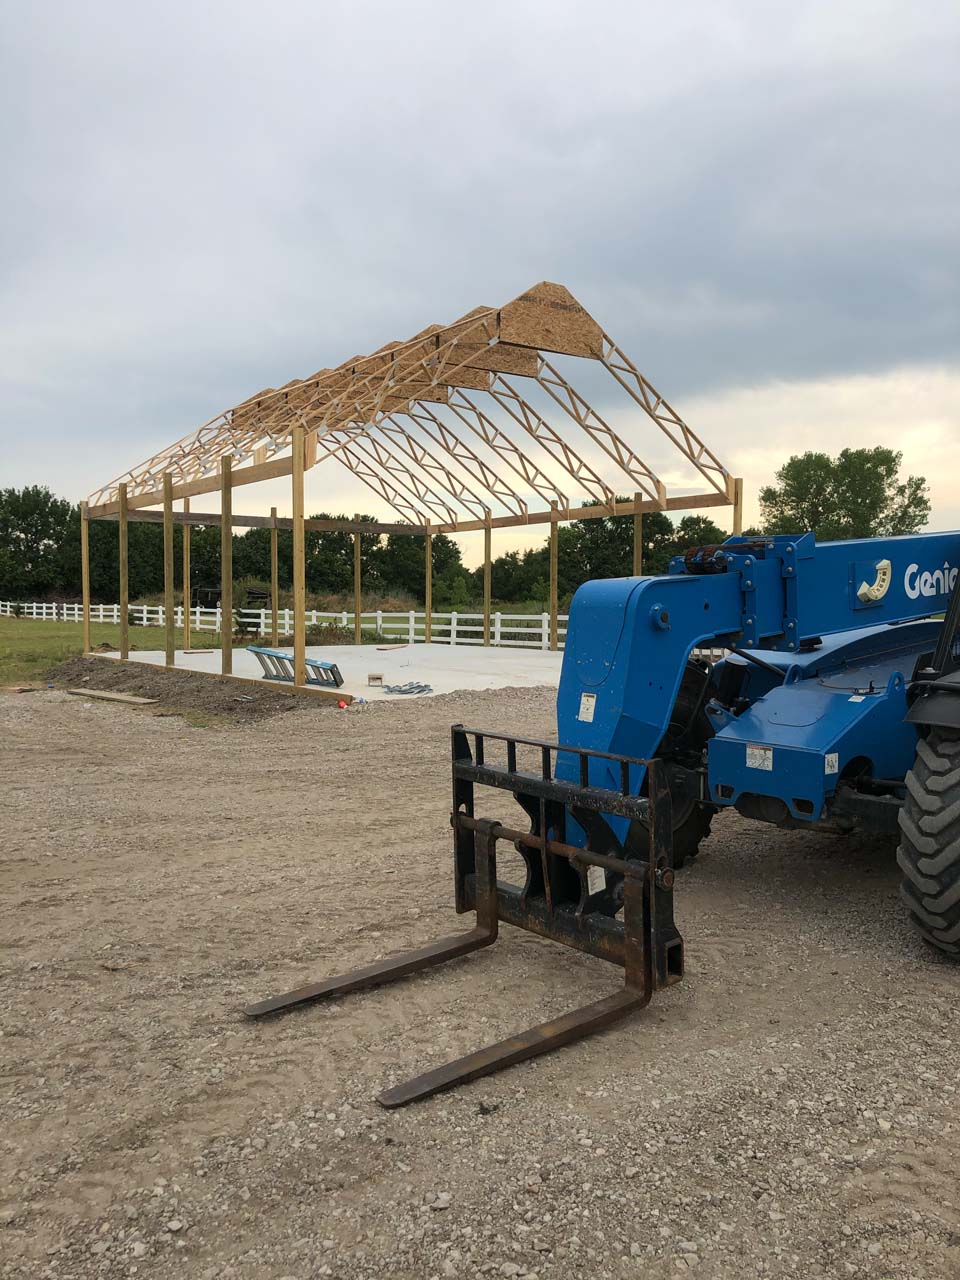 The frame of a metal building stands in a field with a pallet mover